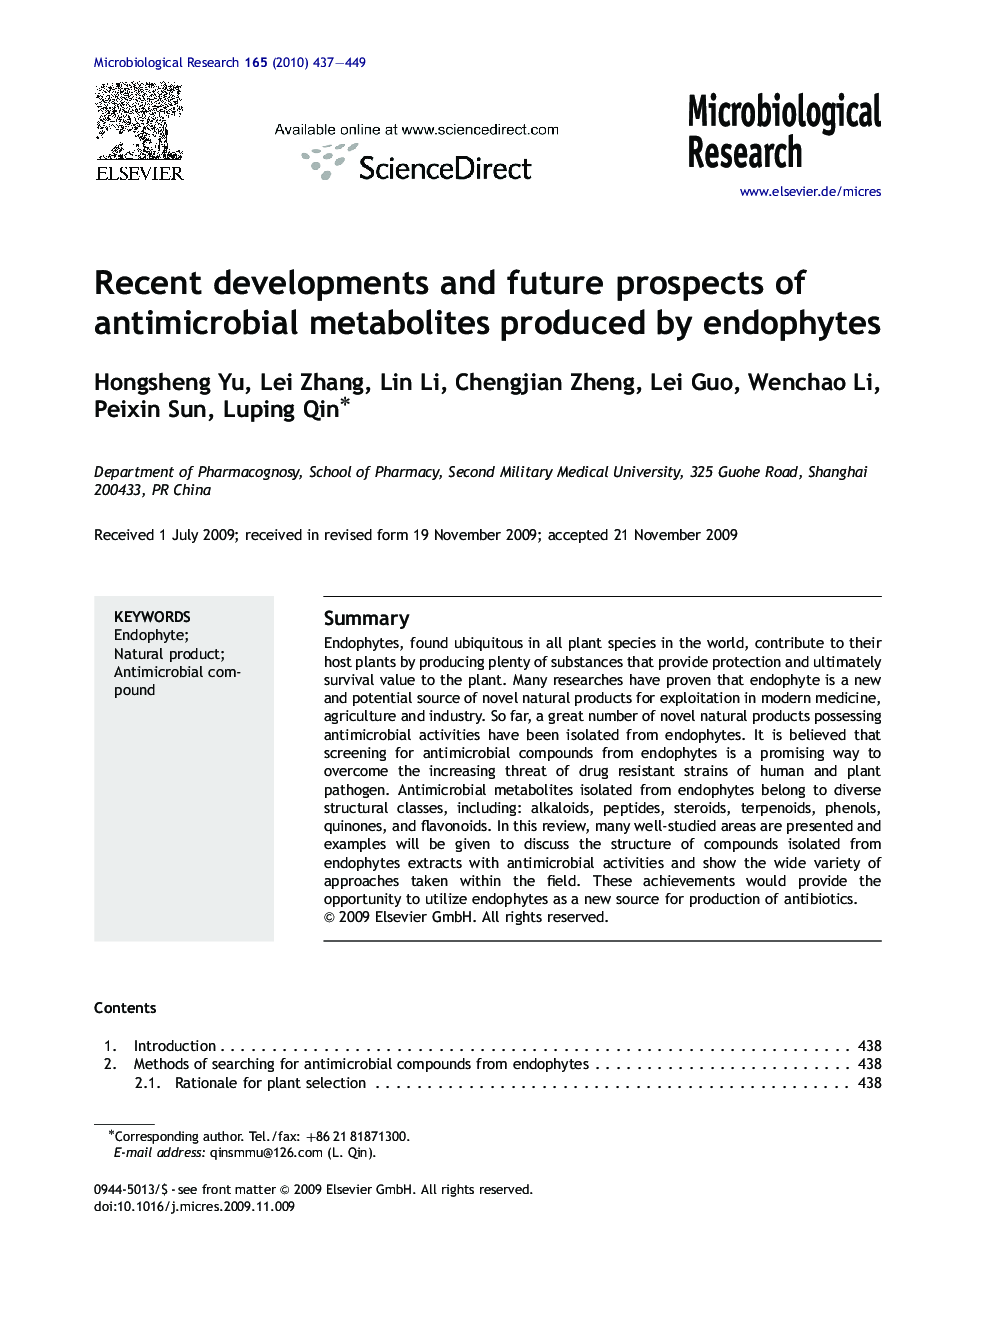 Recent developments and future prospects of antimicrobial metabolites produced by endophytes